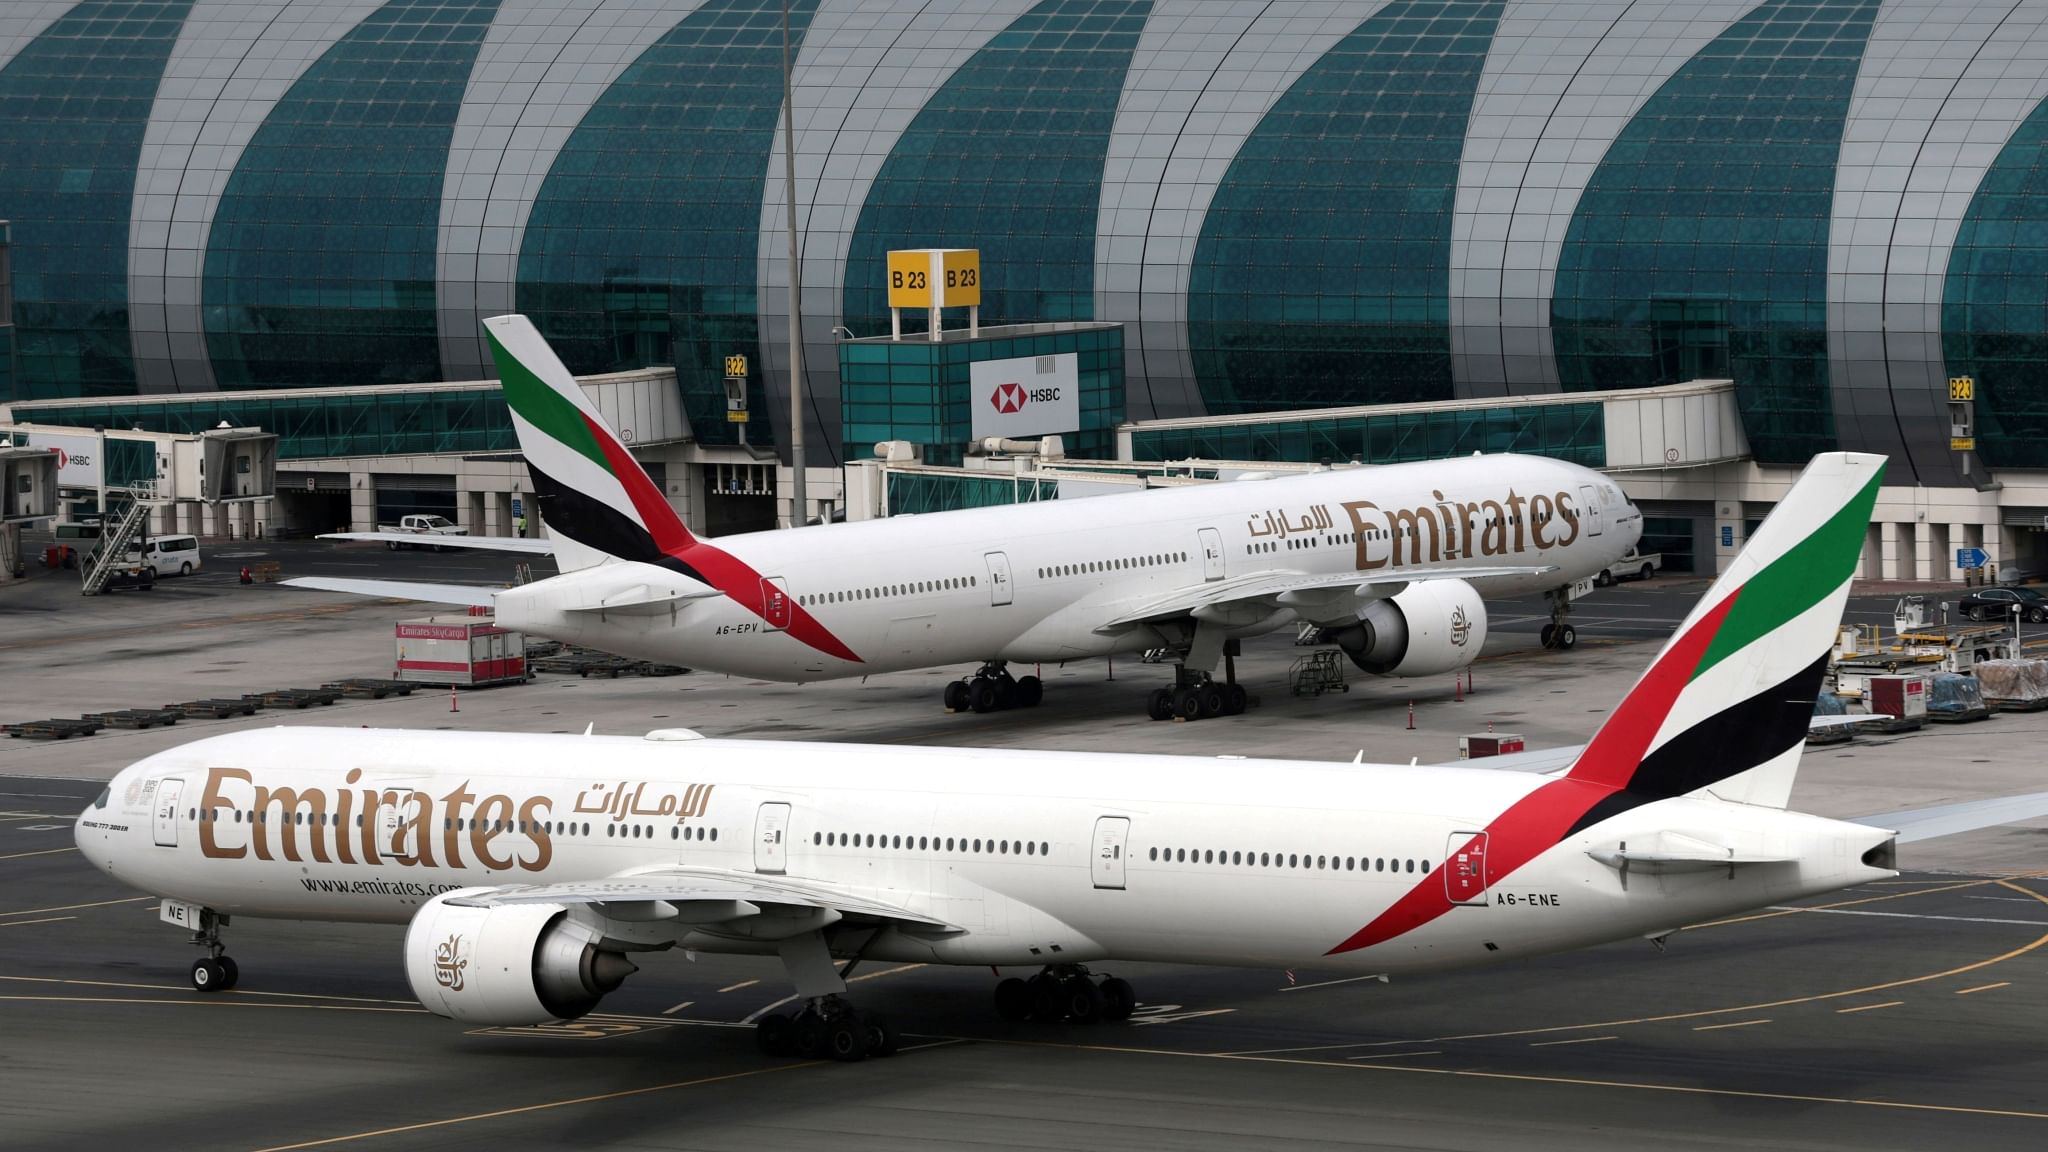 Good news for Indians going to Dubai, Emirates Airline has given this great offer